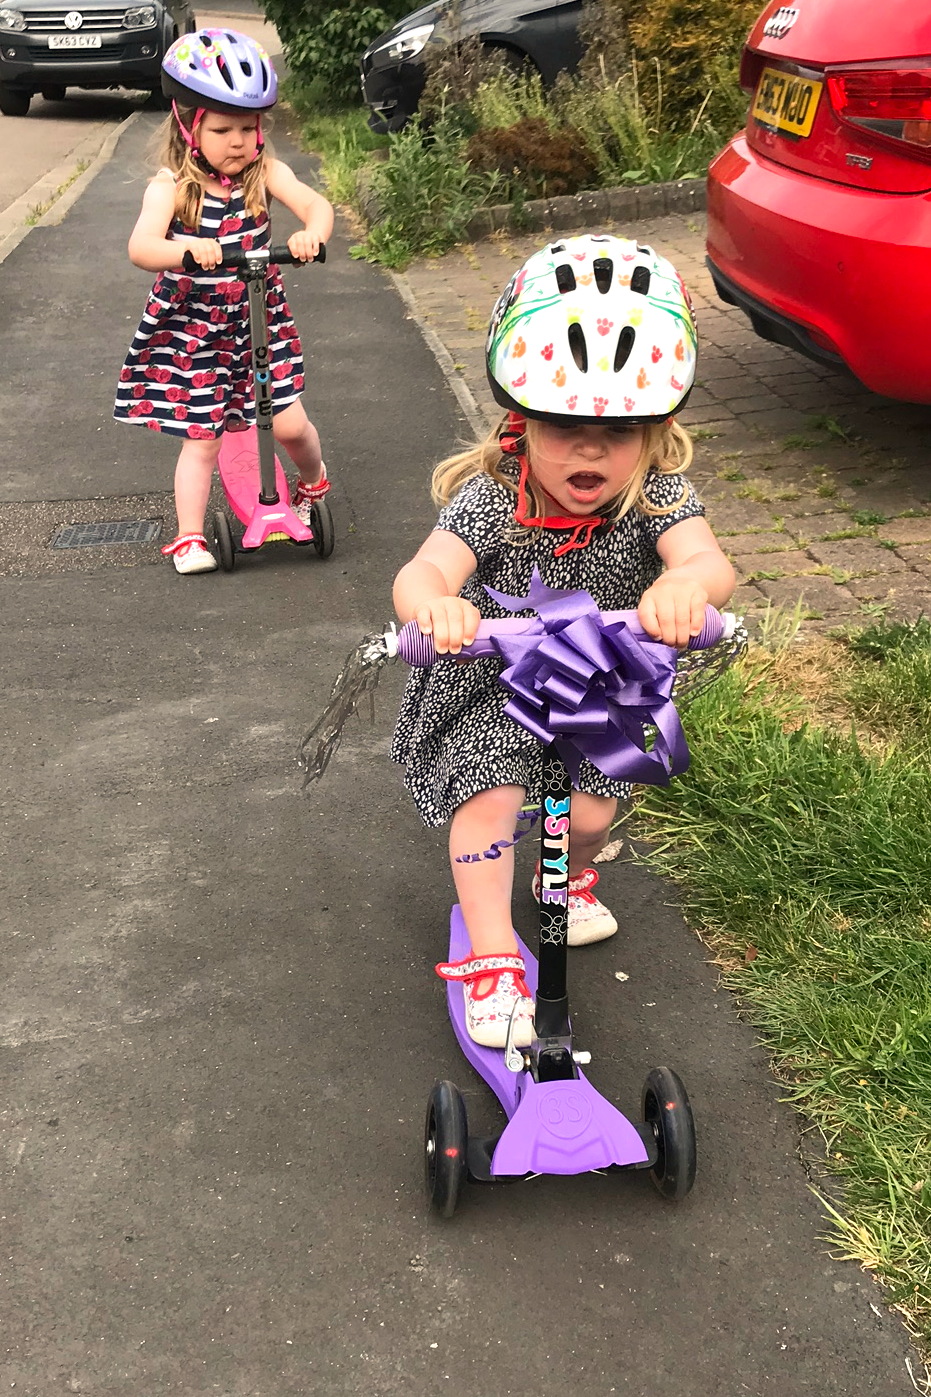 Two toddler sisters on scooters with helmets on, scooting down a pavement